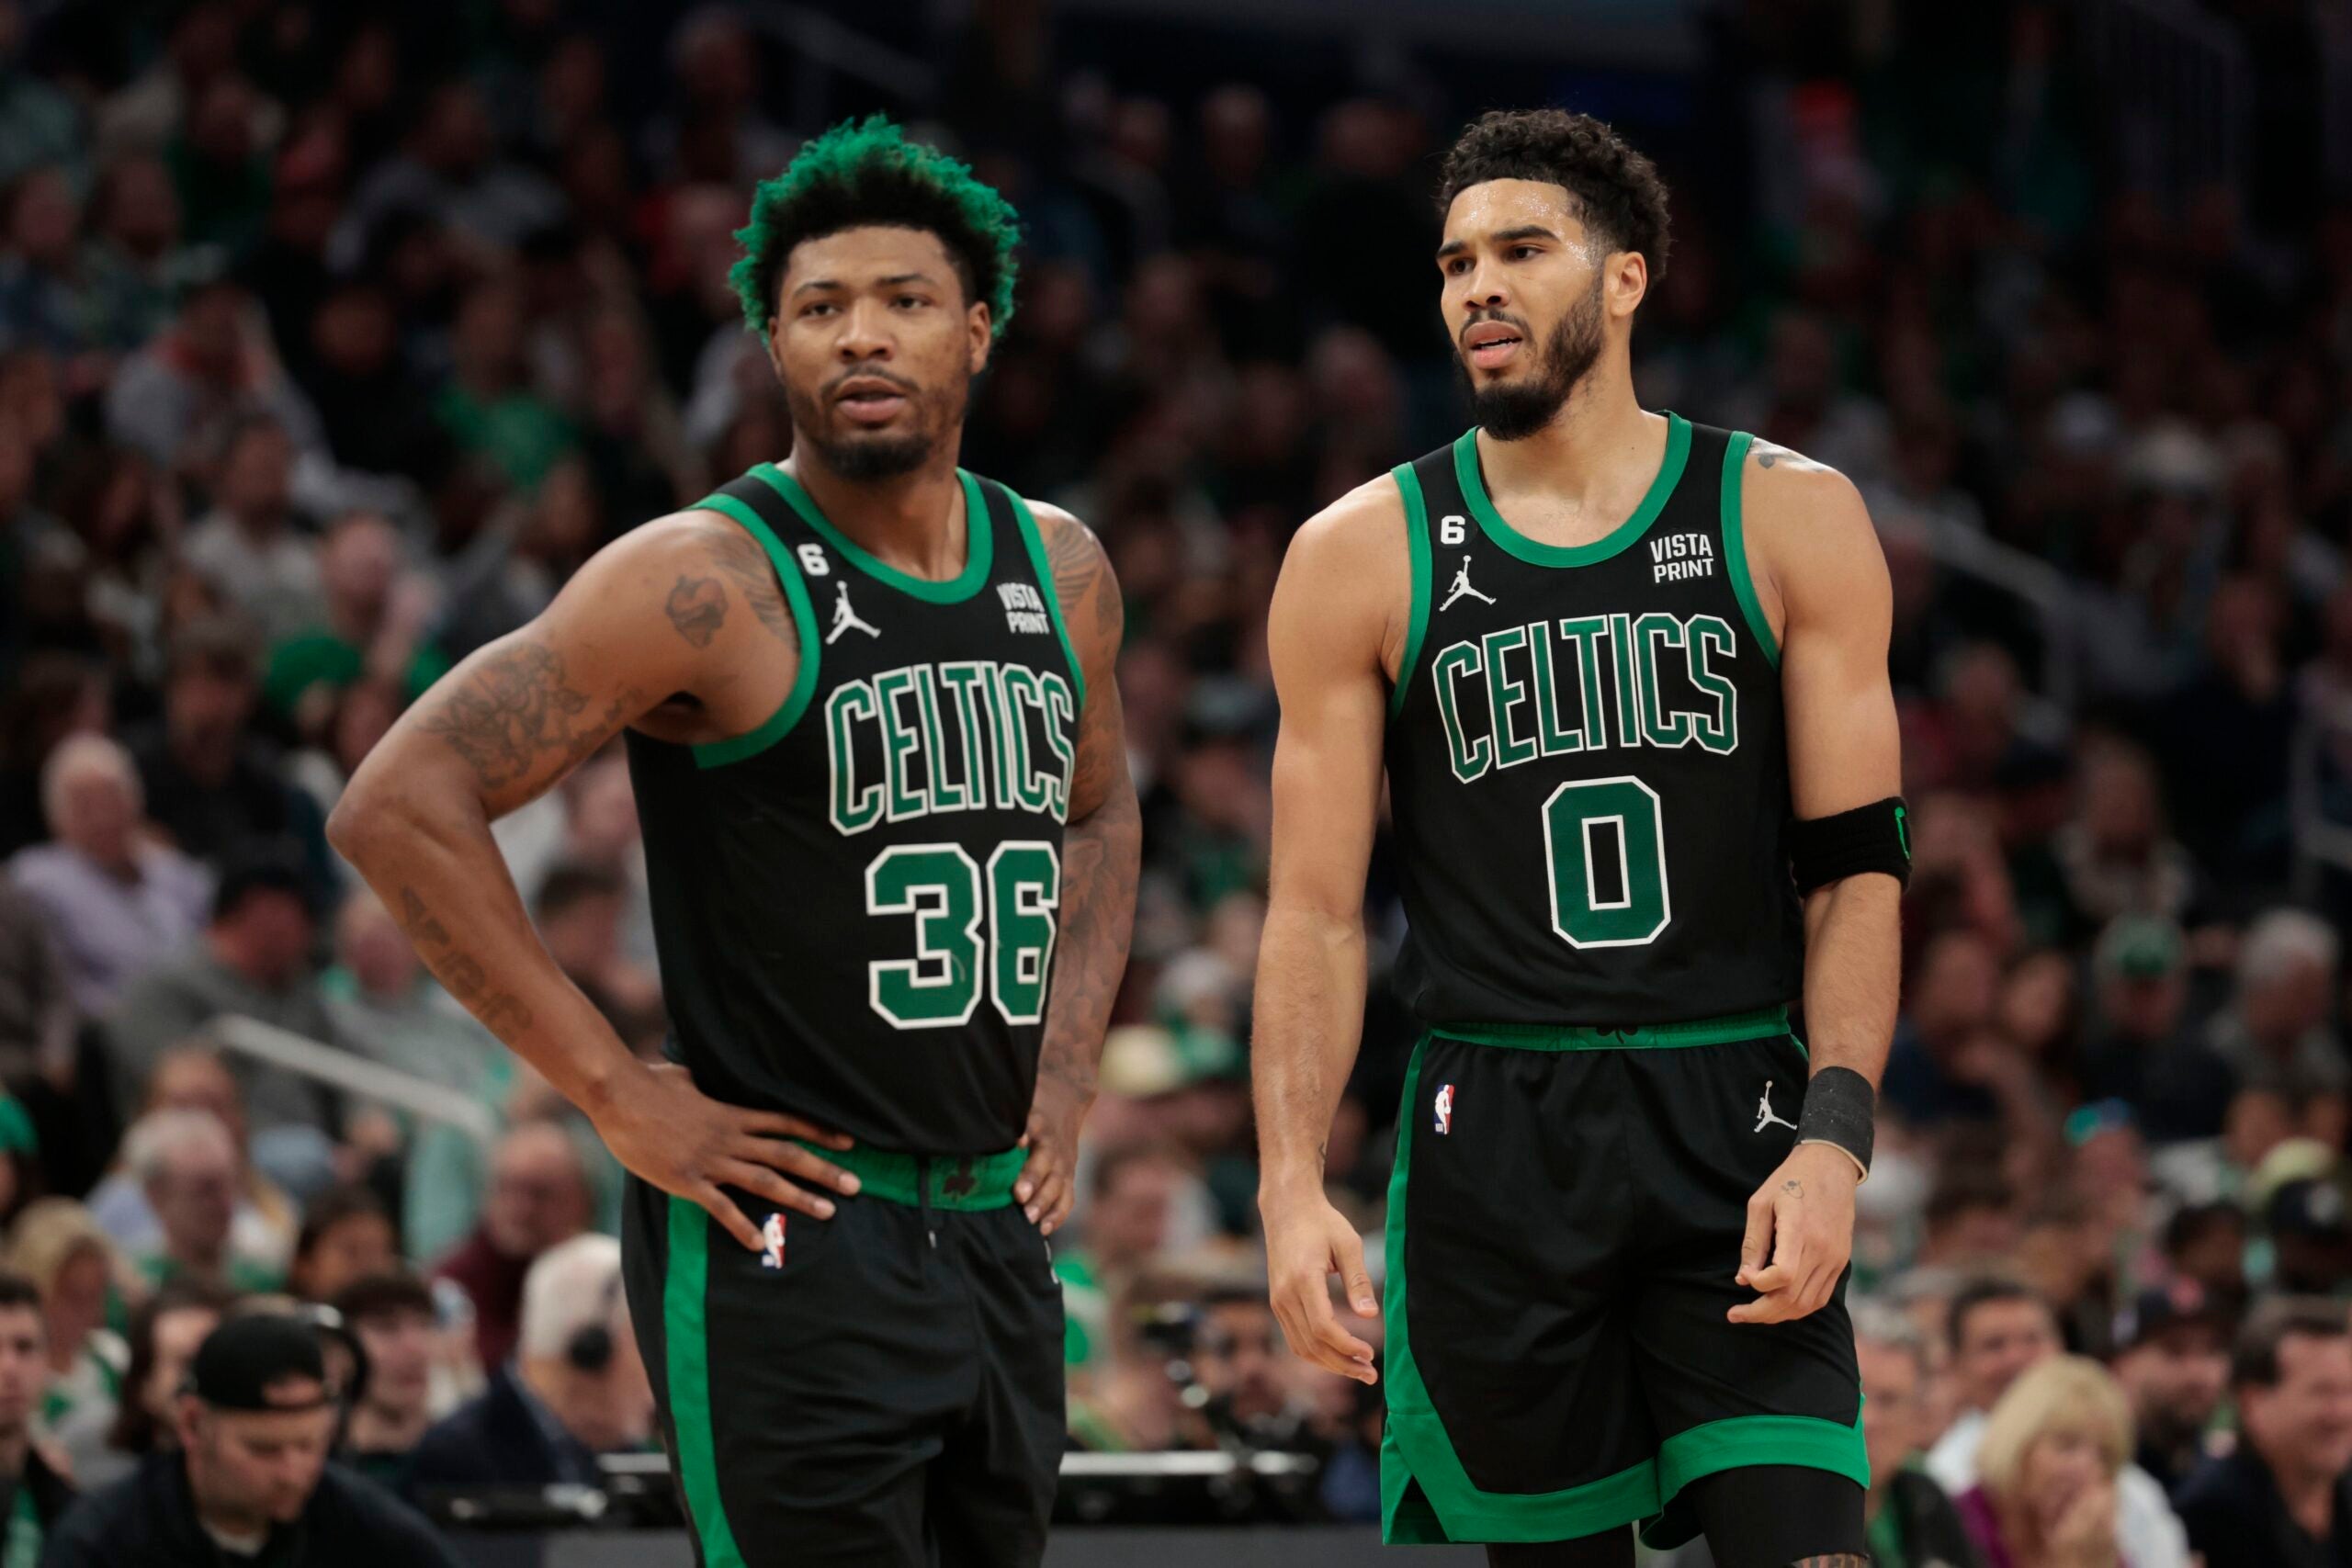 Marcus Smart returned to Game 3 after suffering ankle sprain